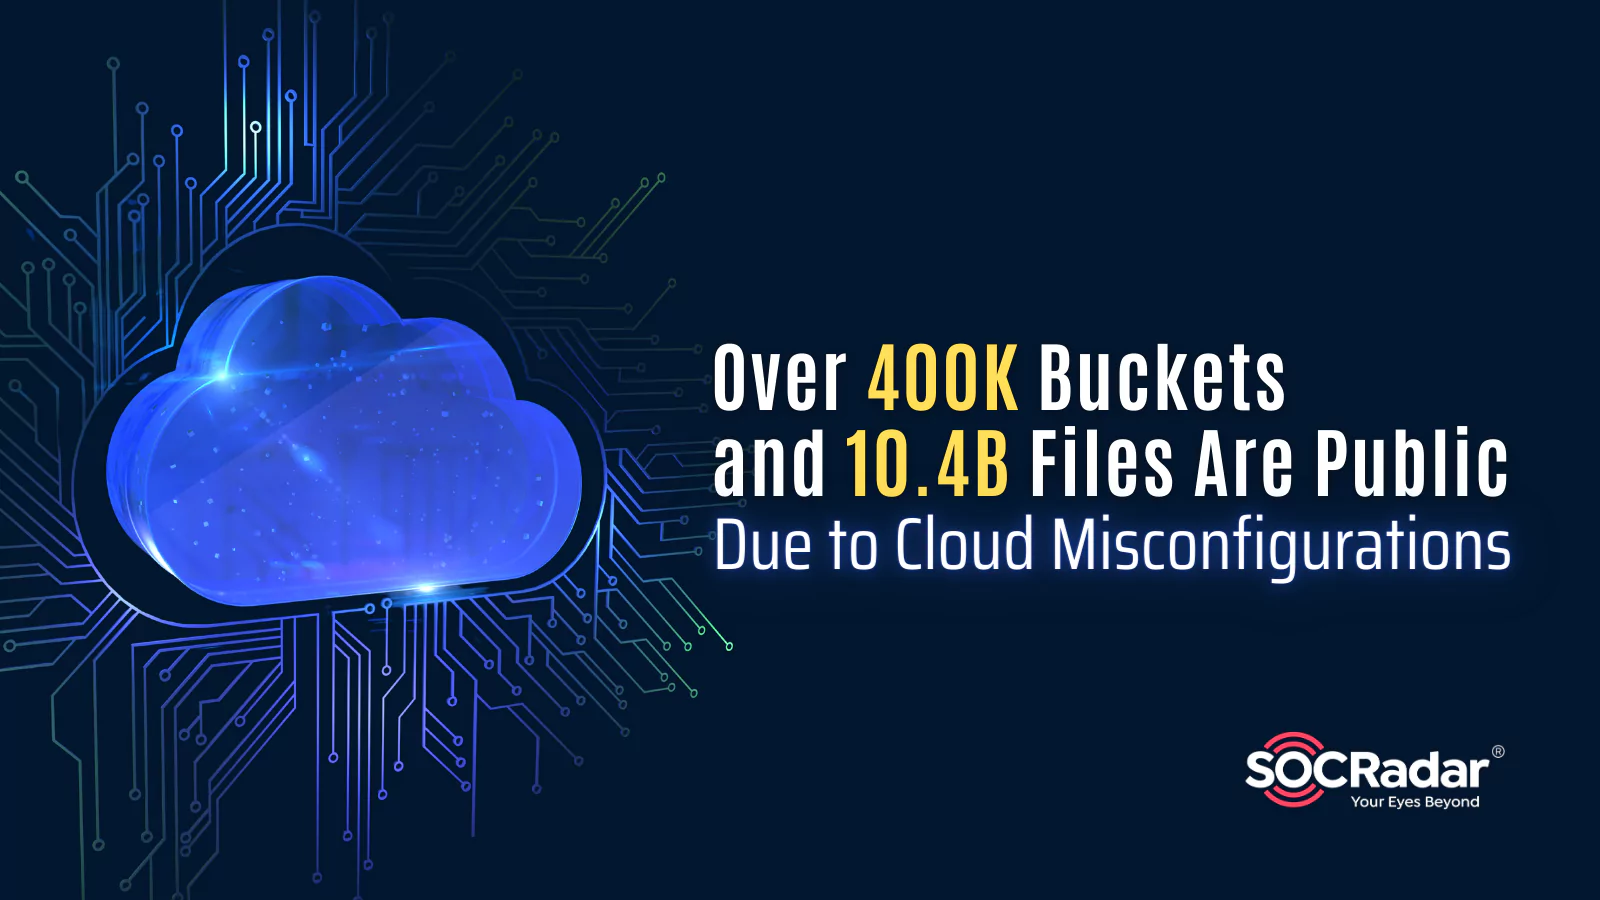 SOCRadar® Cyber Intelligence Inc. | Over 400K Buckets and 10.4B Files Are Public Due to Cloud Misconfigurations